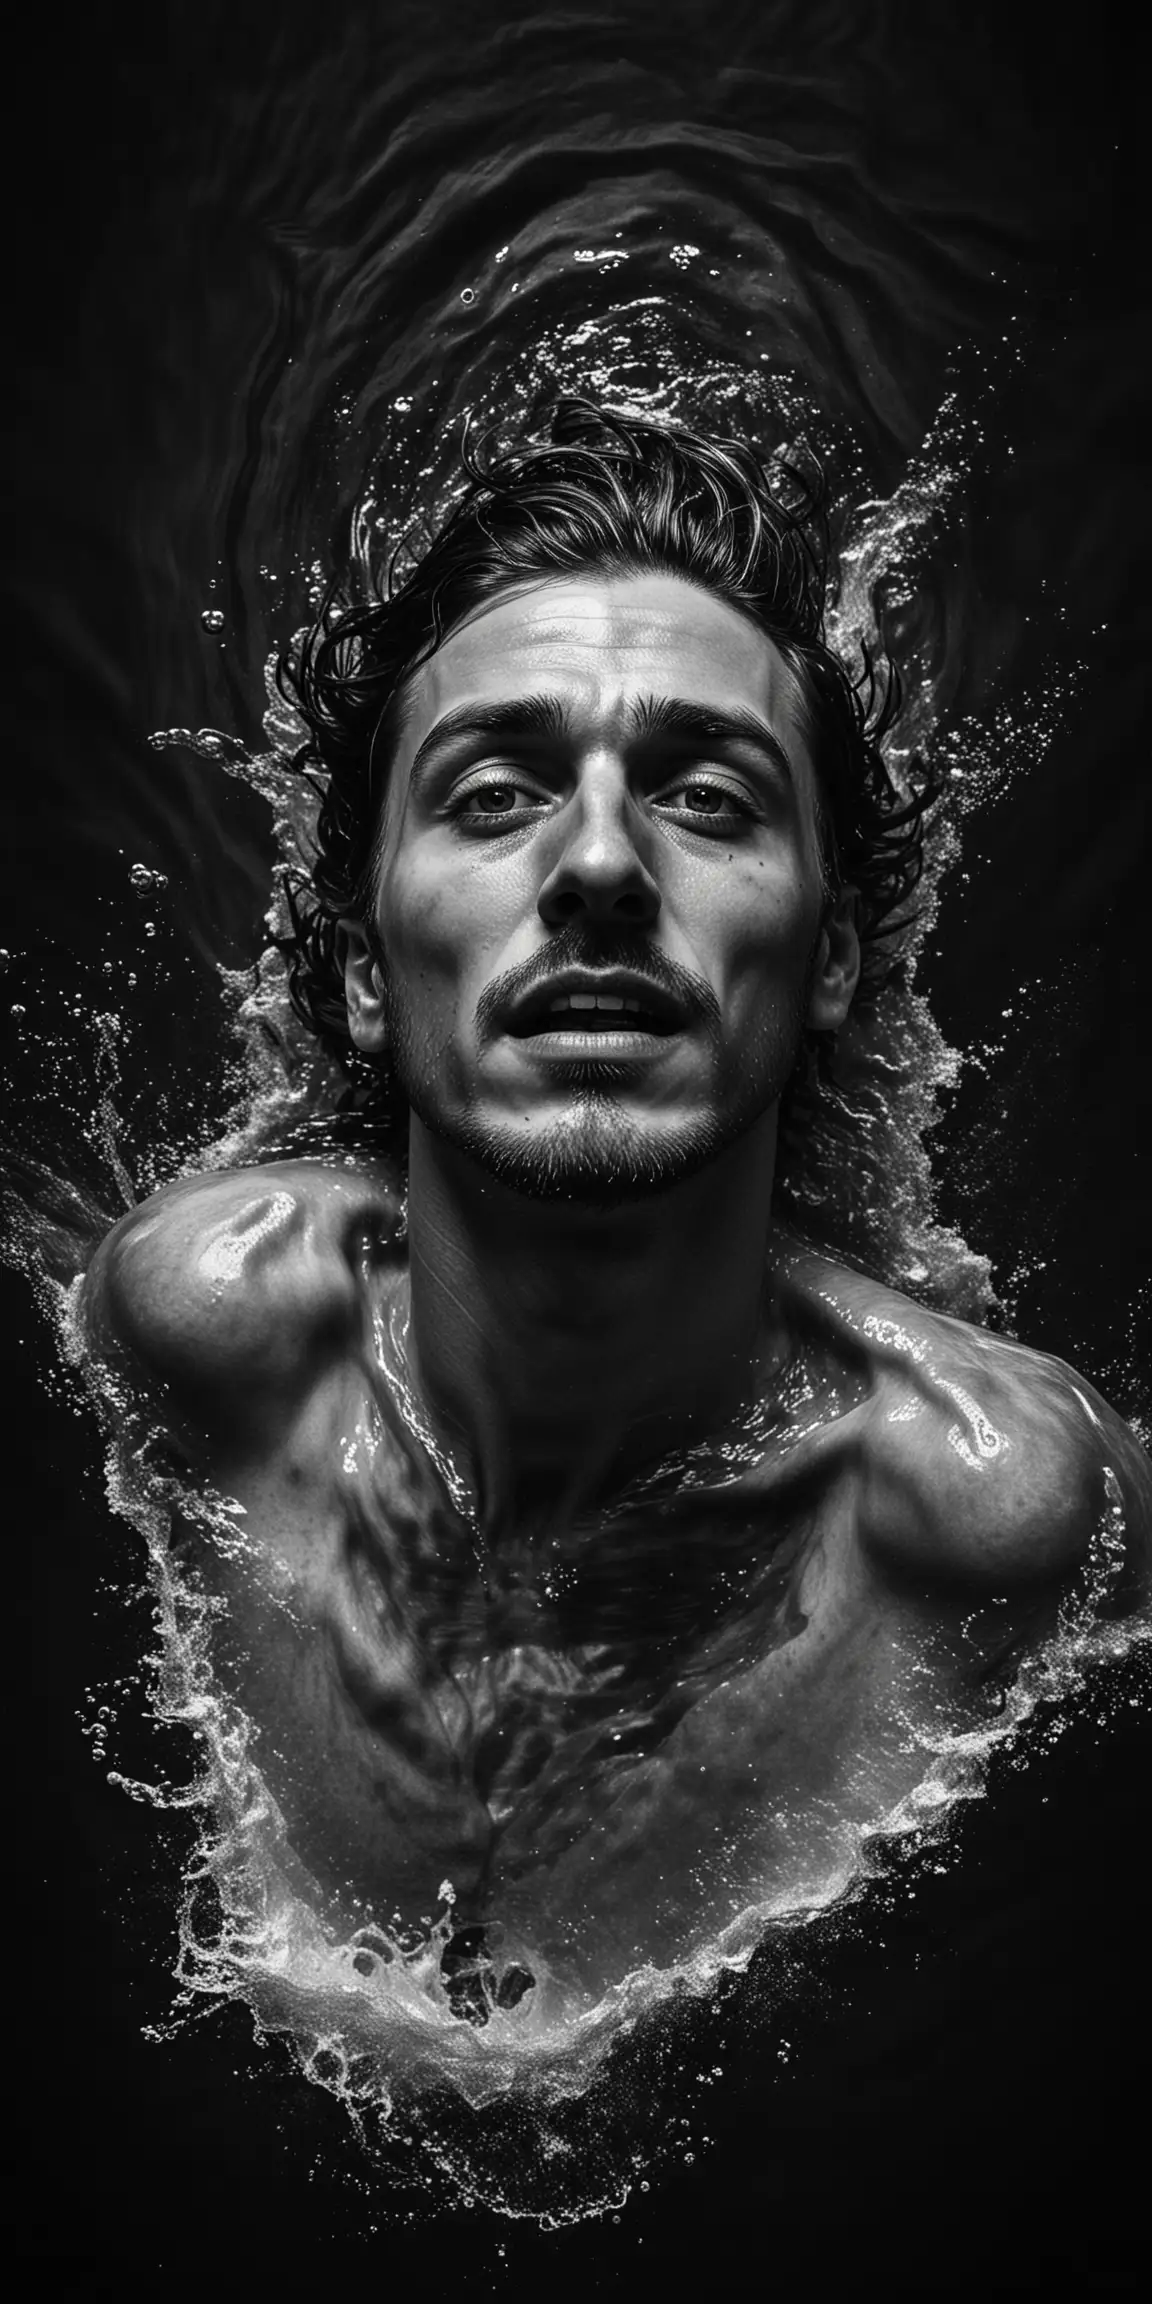 photo shot from above, man drowning, distorted, portrait, horrifying high contrast, black and white, fine detail, black background